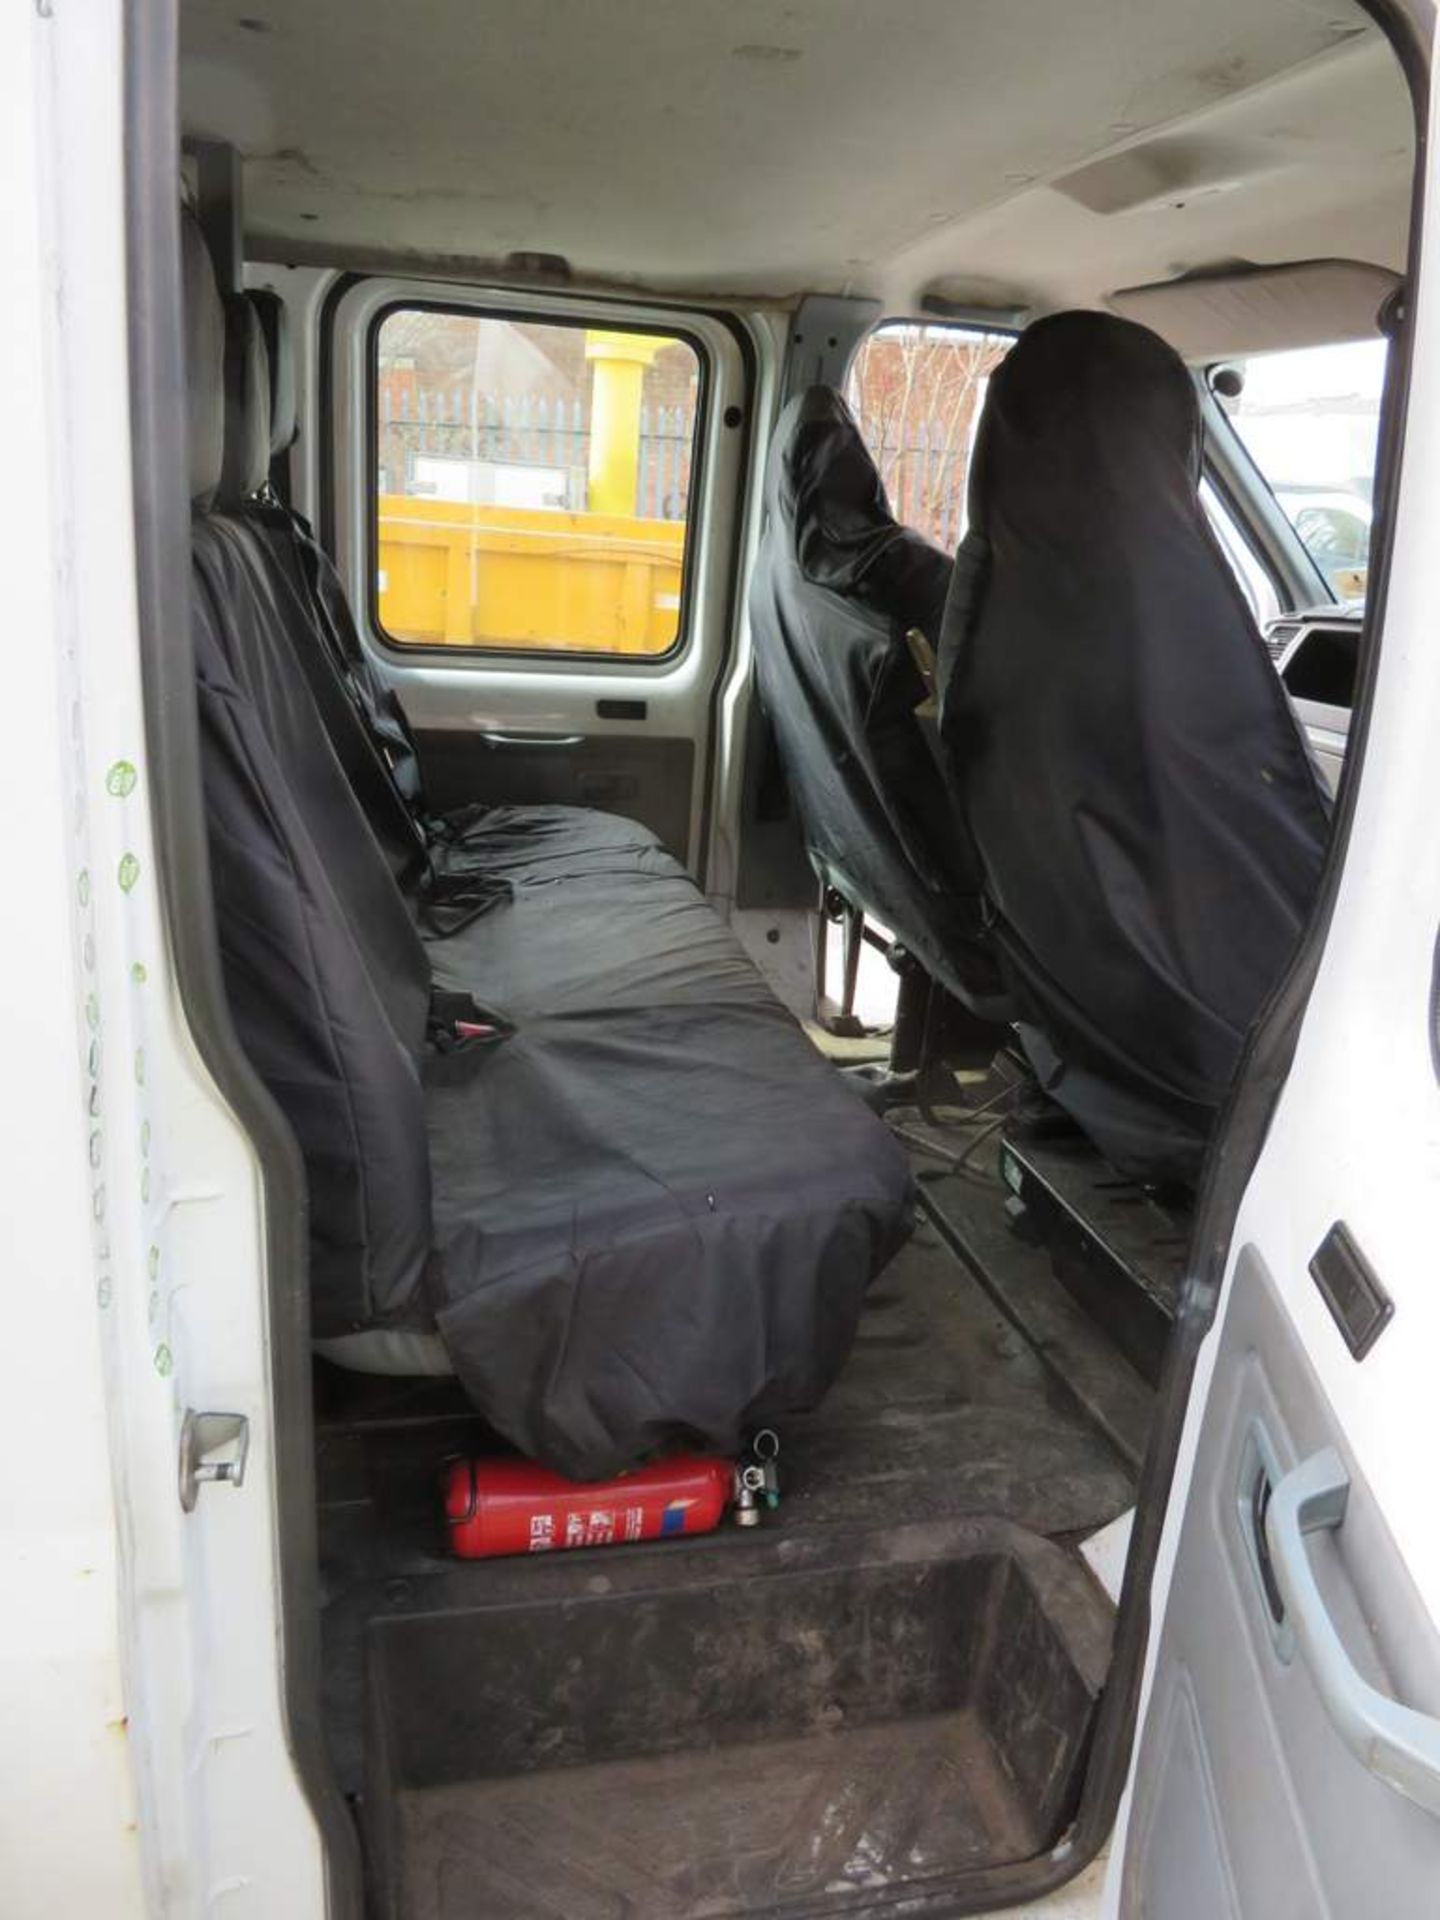 2009 Ford Transit T350L Double Cab Tipper - FX09 YFR - Image 14 of 24